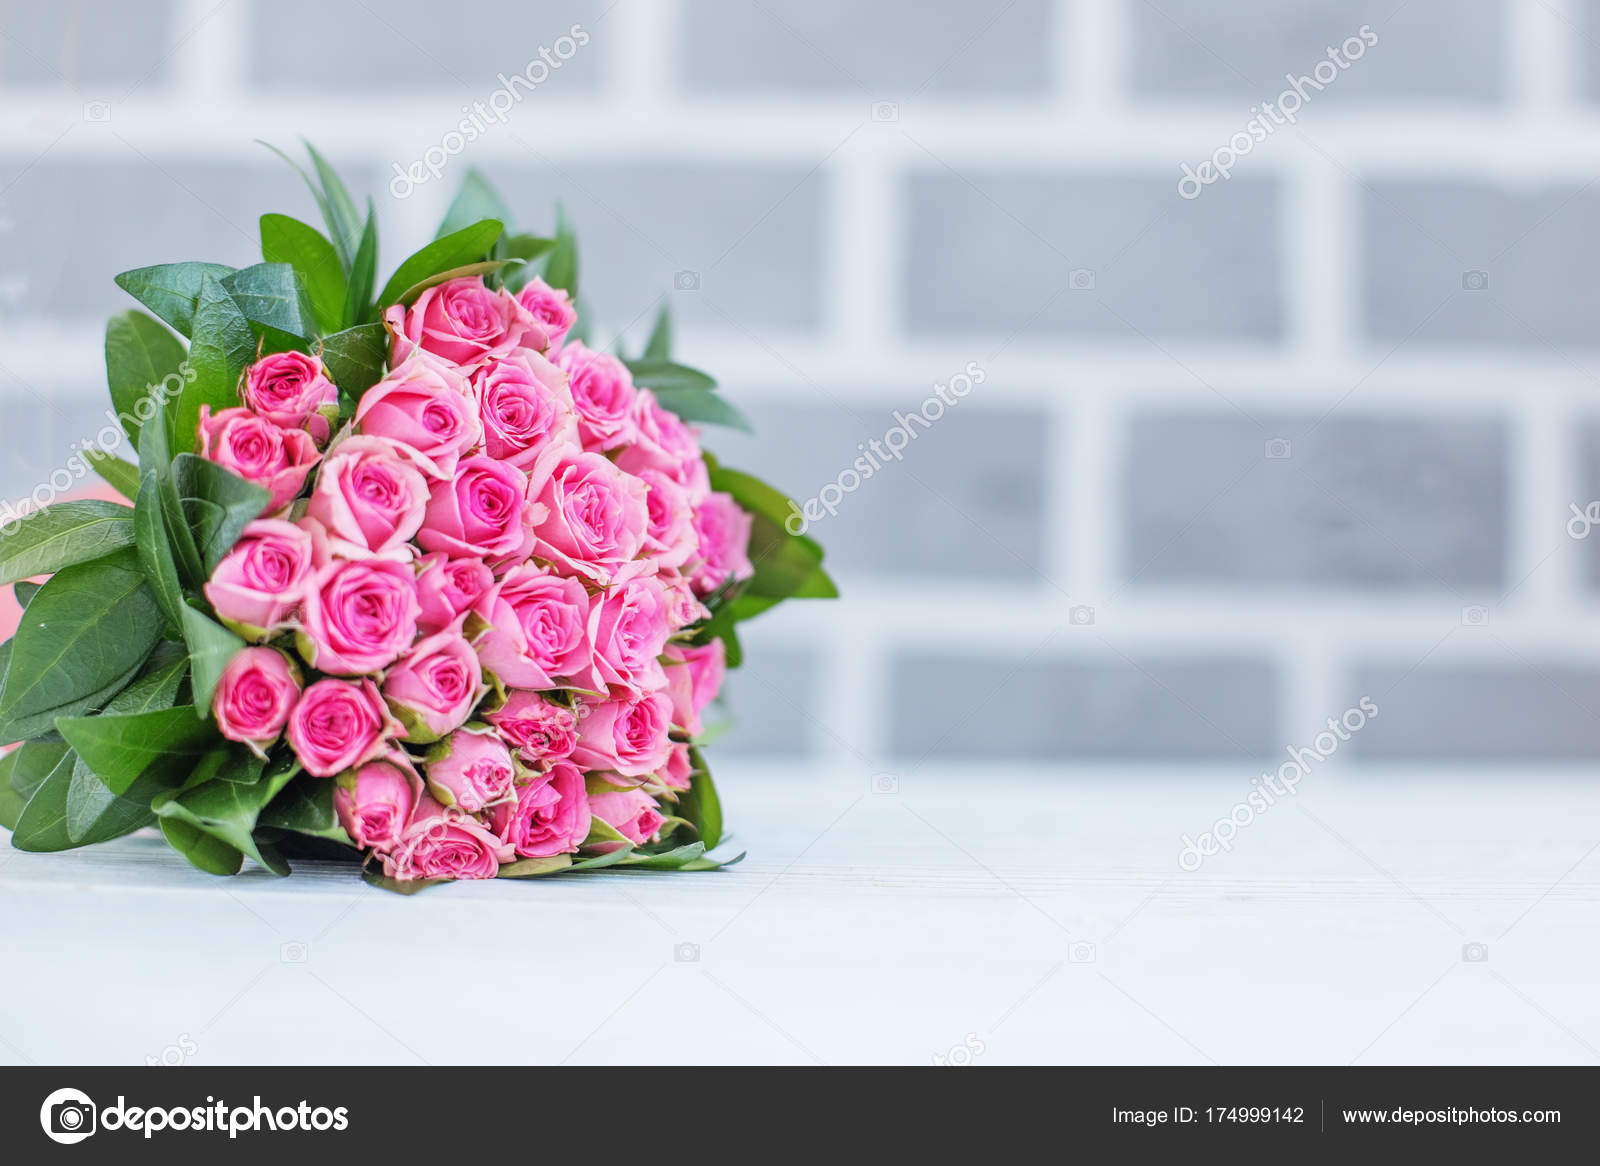 Happy Birthday Flowers Greetings Beautiful Bouquet Of Roses For